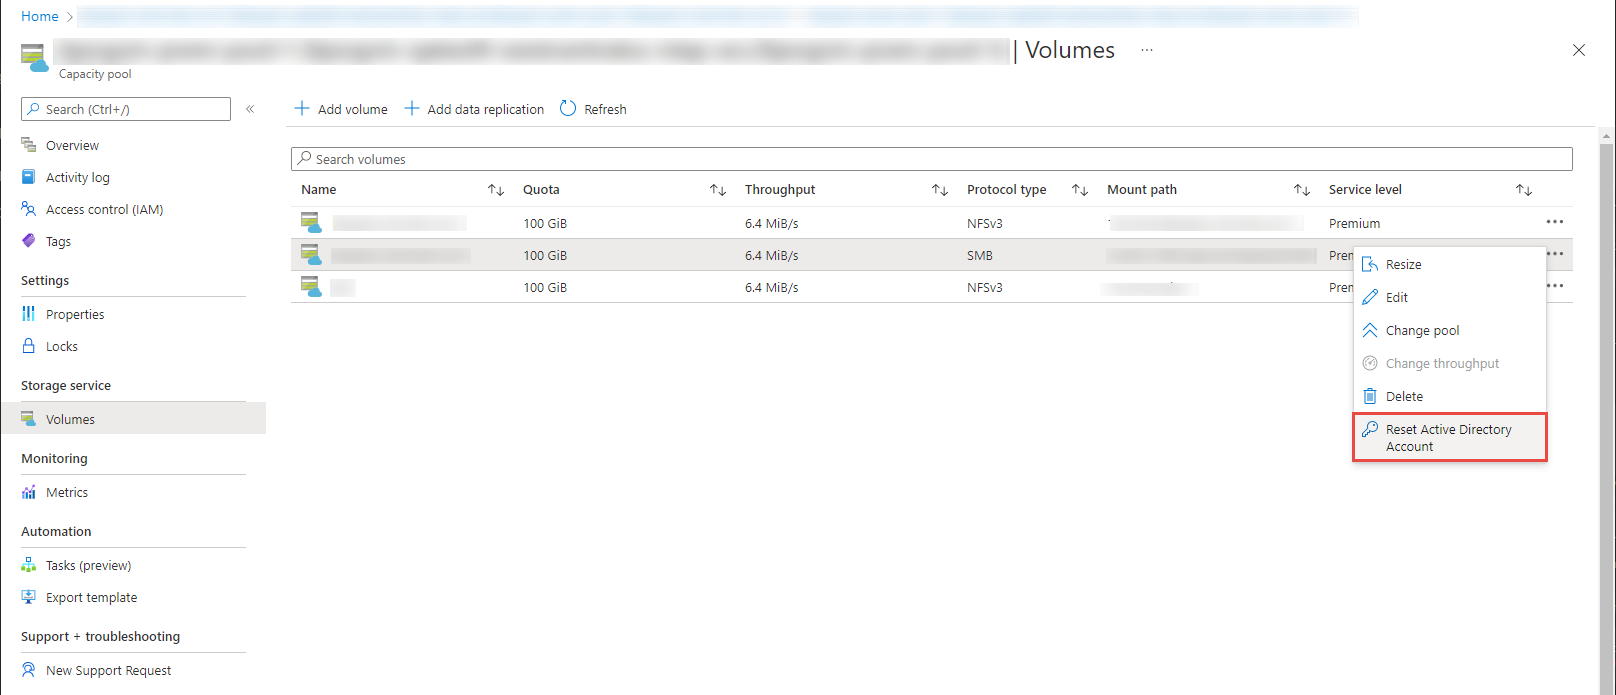 Azure volume list with the Reset Active Directory Account button highlighted.